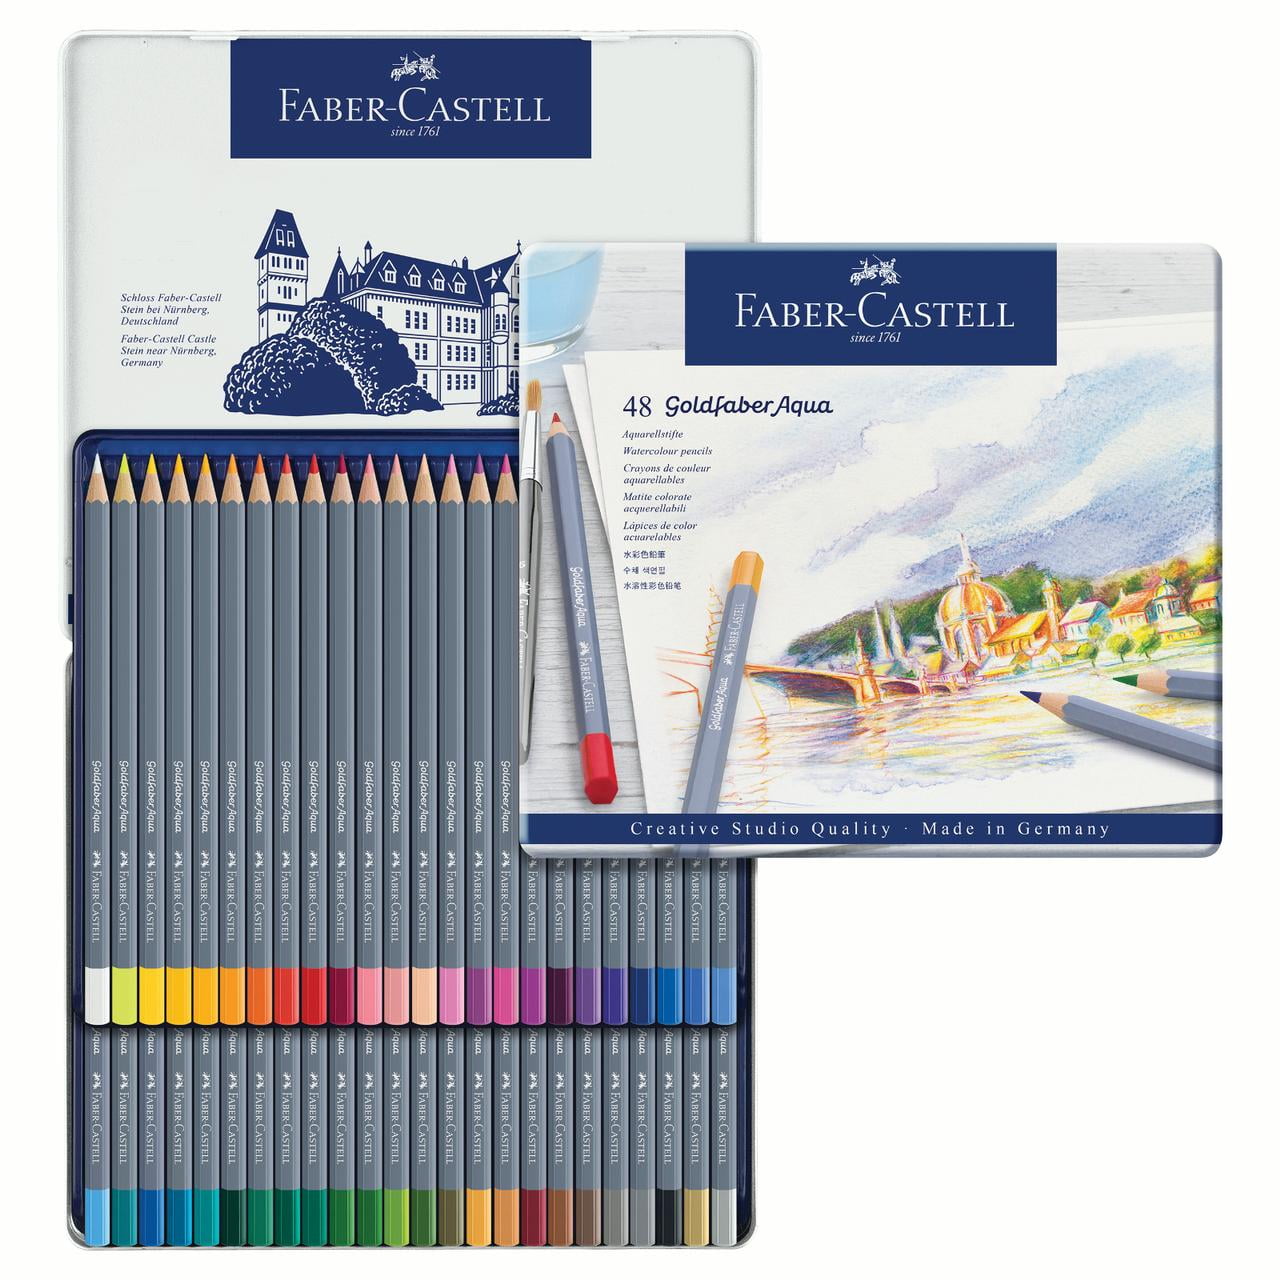 Faber Castell Watercolor Pencil Art Kit - New Unopened - toys